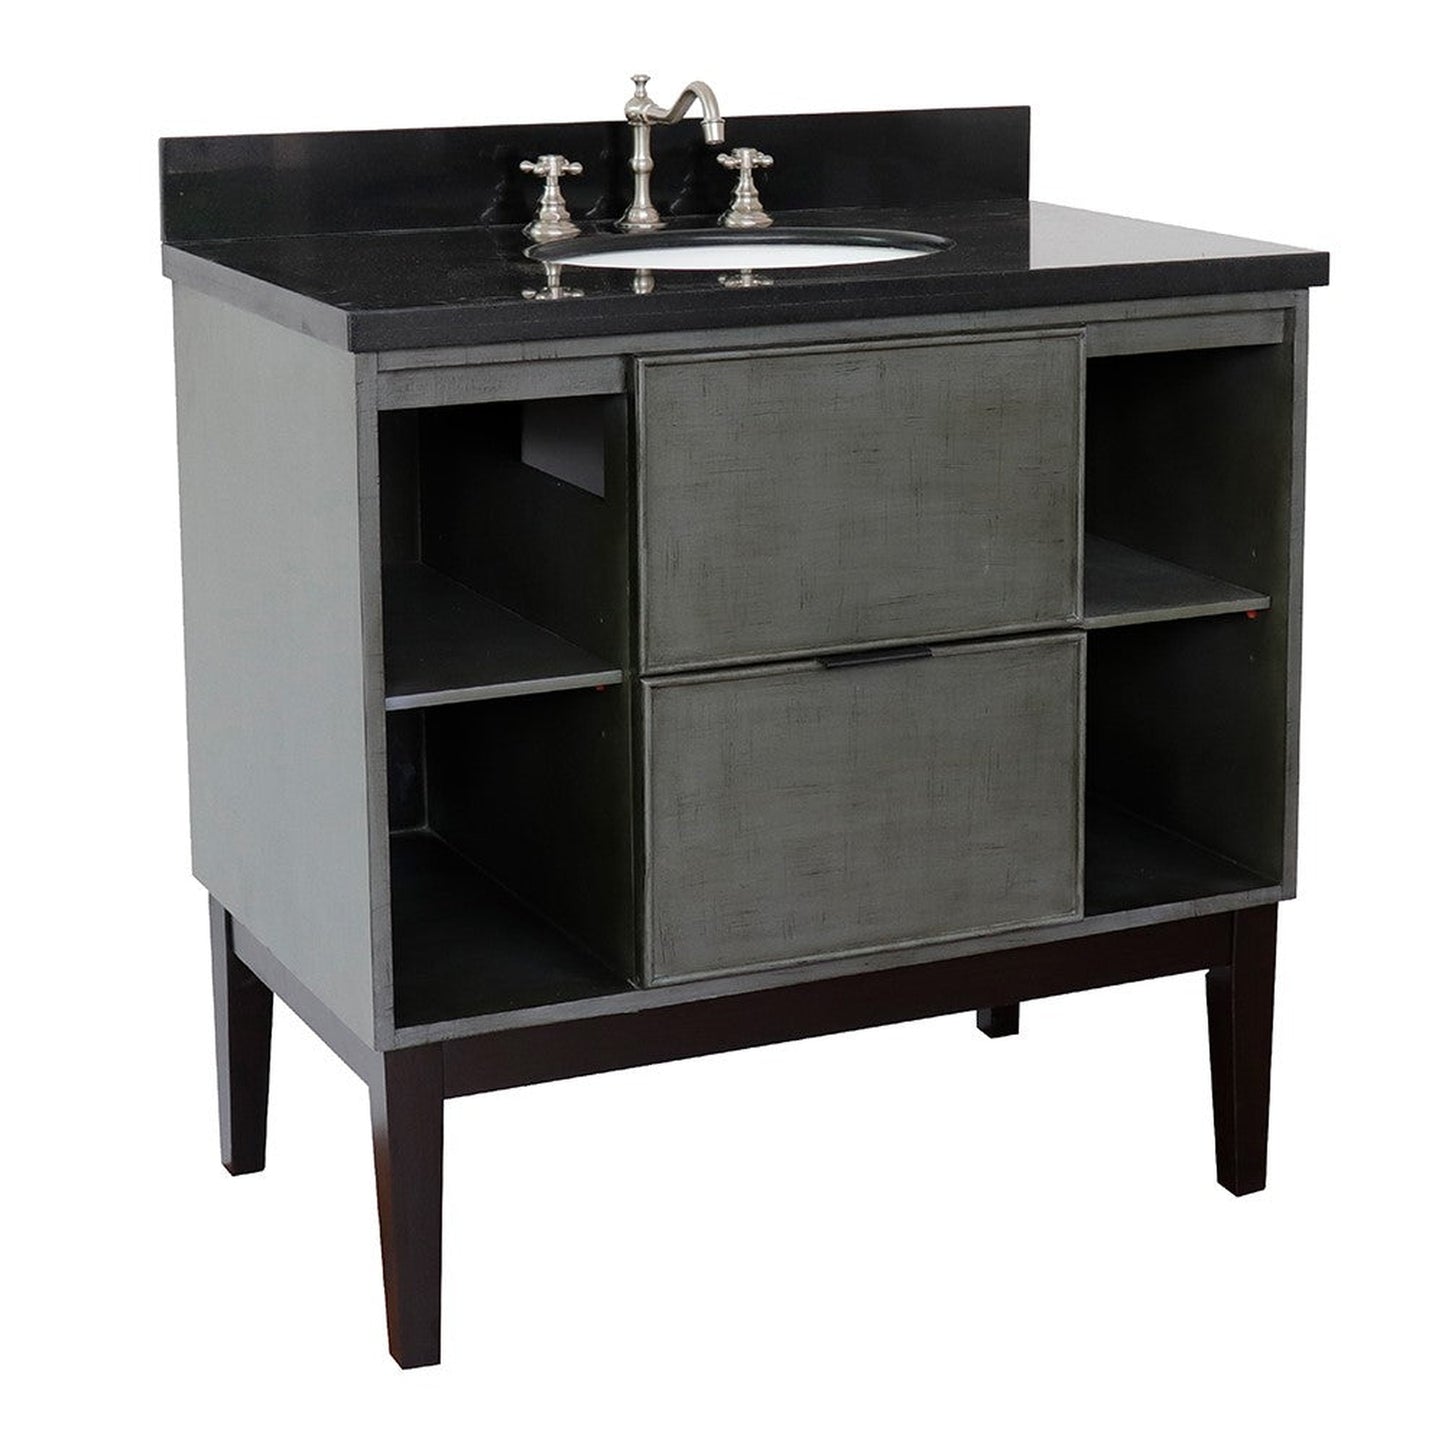 Bellaterra Home Paris Exposed 37" 1-Drawer Linen Gray Freestanding Vanity Set With Ceramic Undermount Oval Sink and Black Galaxy Top